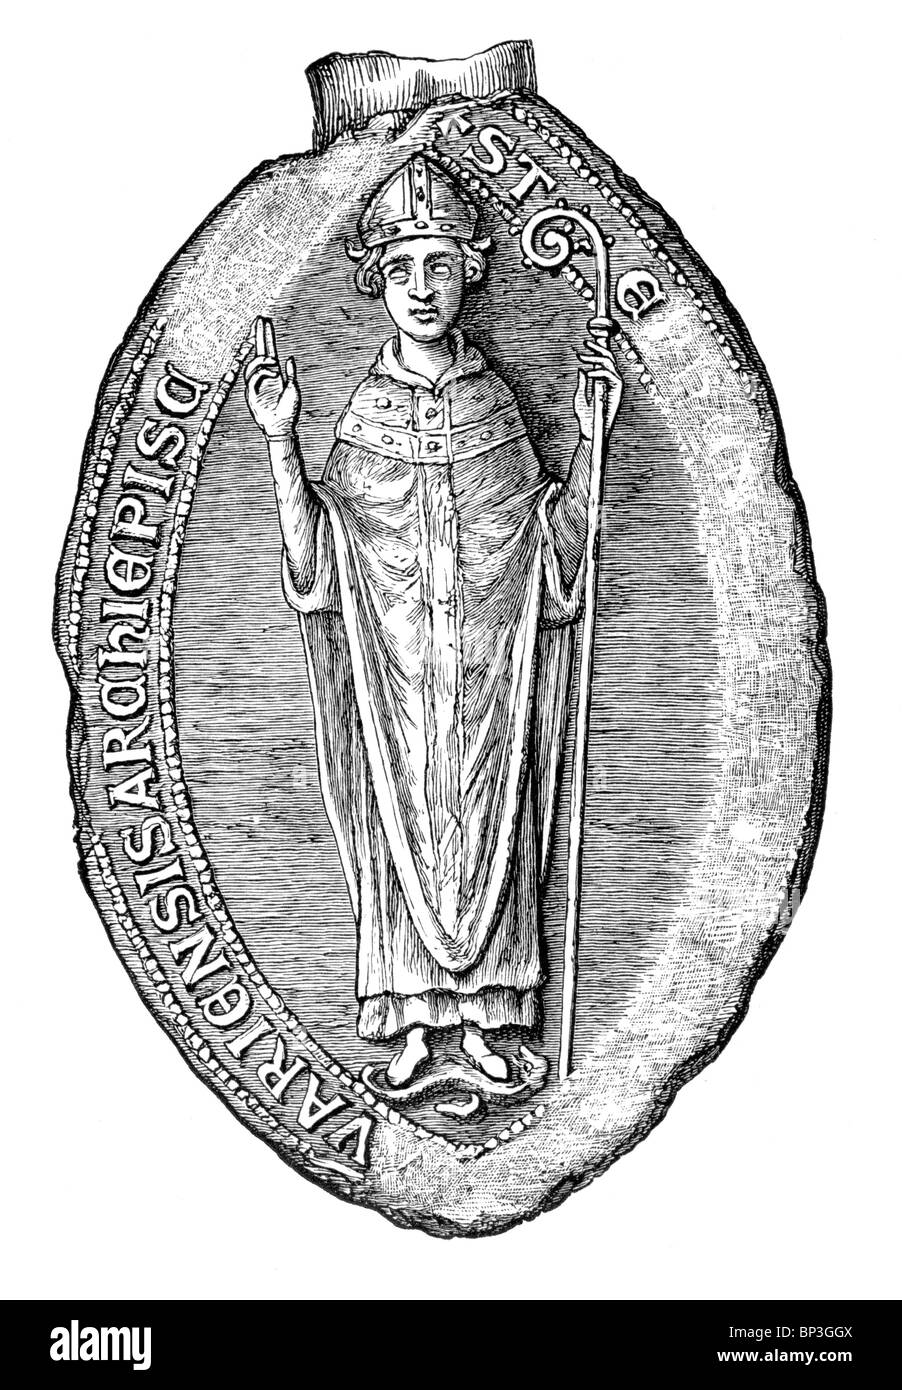 Black and White Illustration; Seal of Stephen Langton (1150-1228), Archbishop of Canterbury from 1207 to 1228; 13th century; Stock Photo